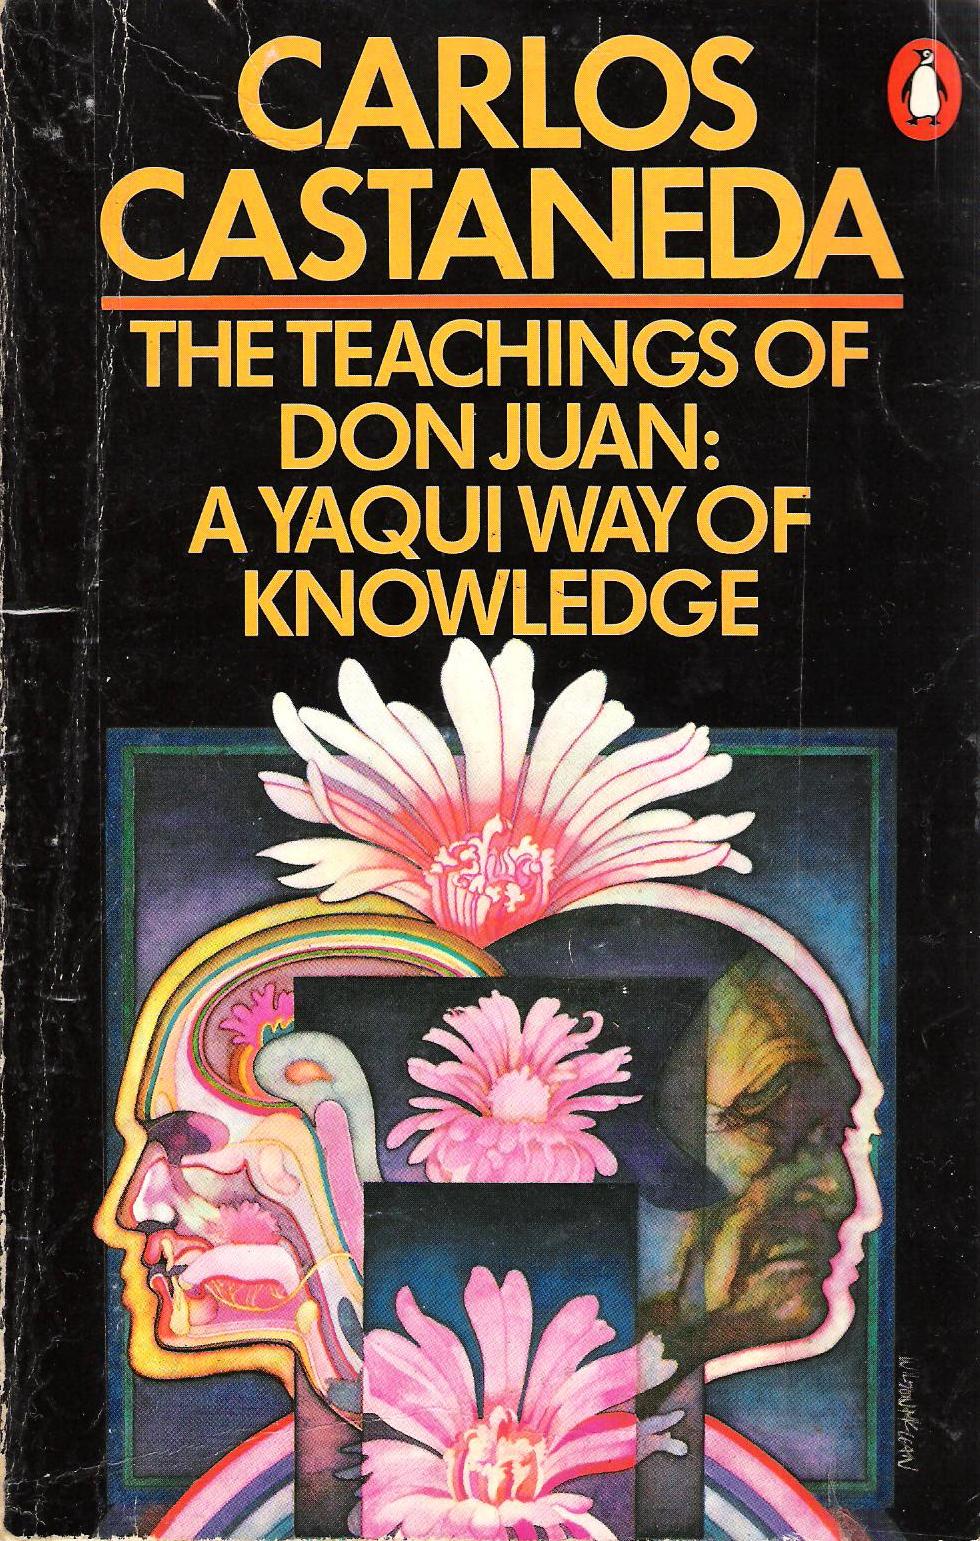 DYE HARD PRESS: The Teachings of Don Juan: A Yaqui Way of Knowledge by